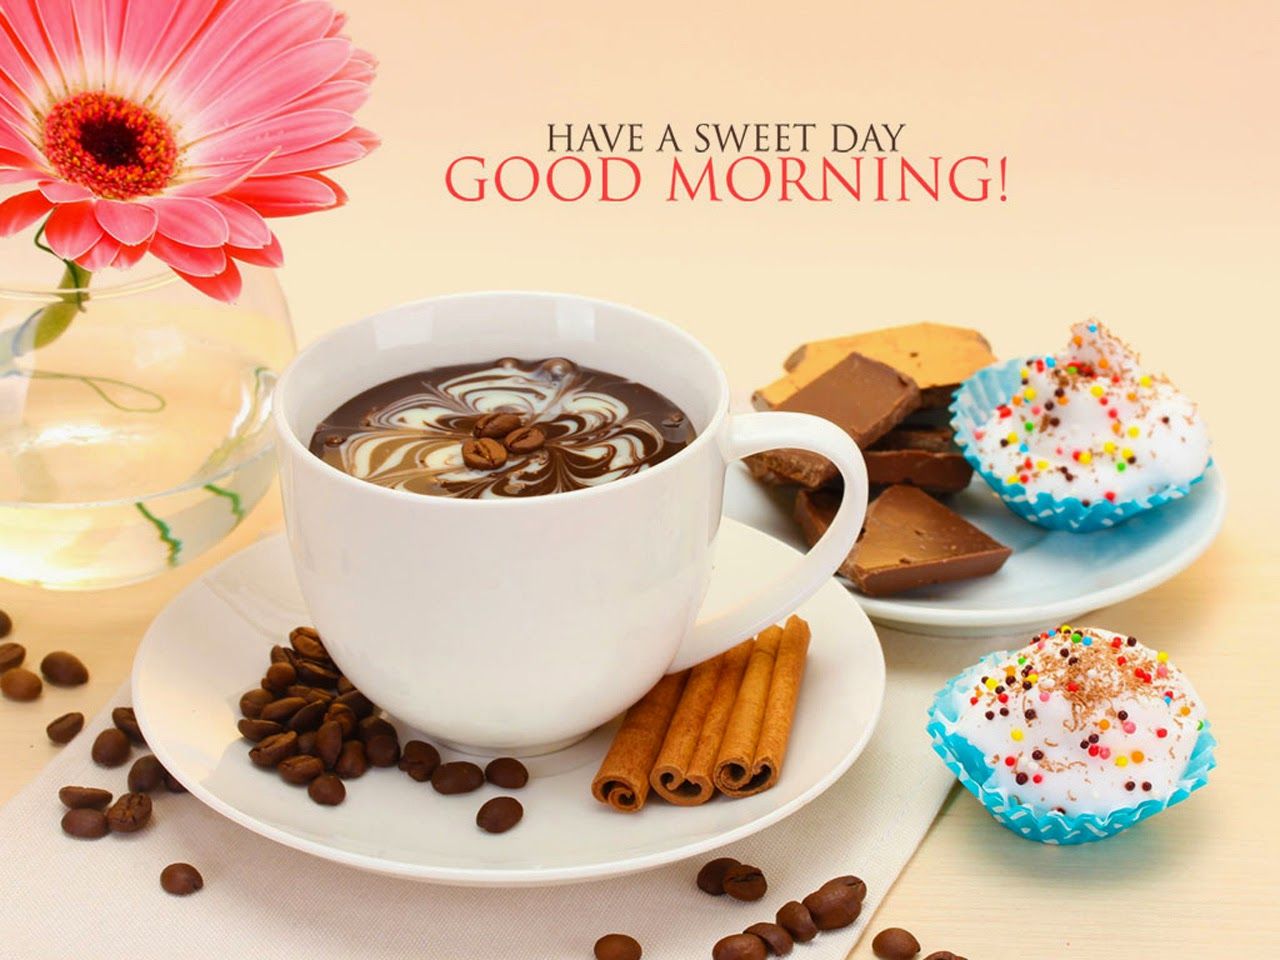 Awesome Good Morning Image with Coffee and Flowers. Top Collection of different types of flowers in the image HD